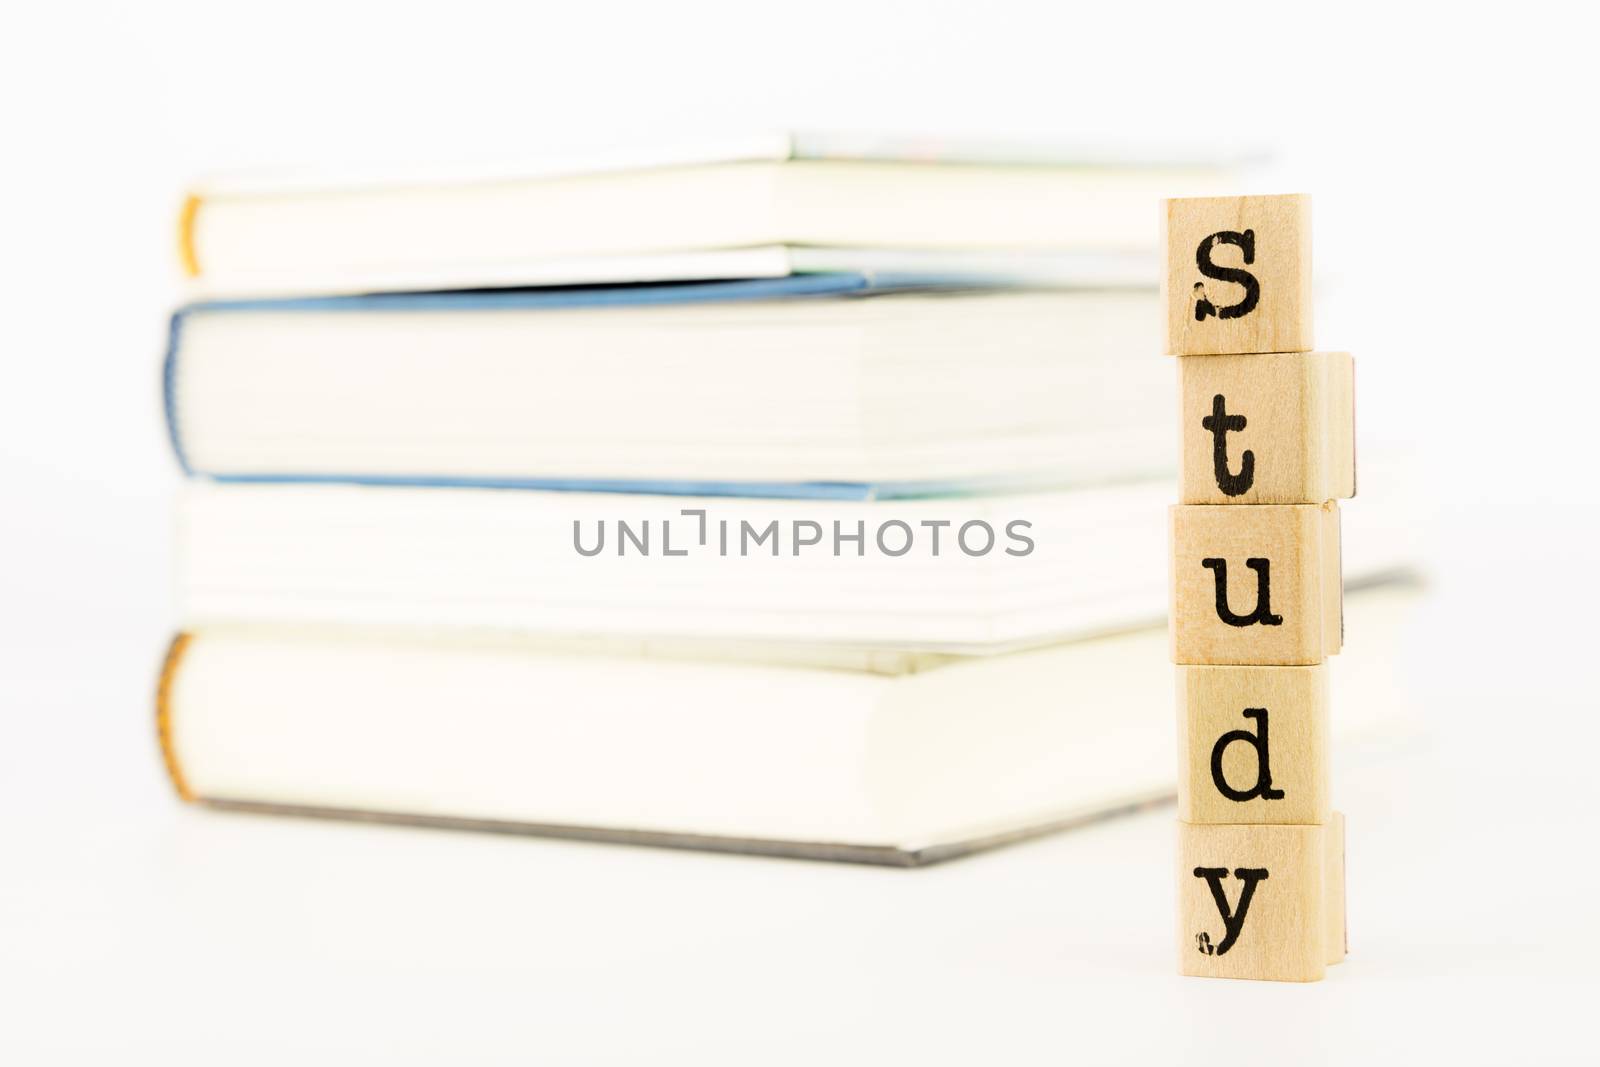 study wording and books by vinnstock